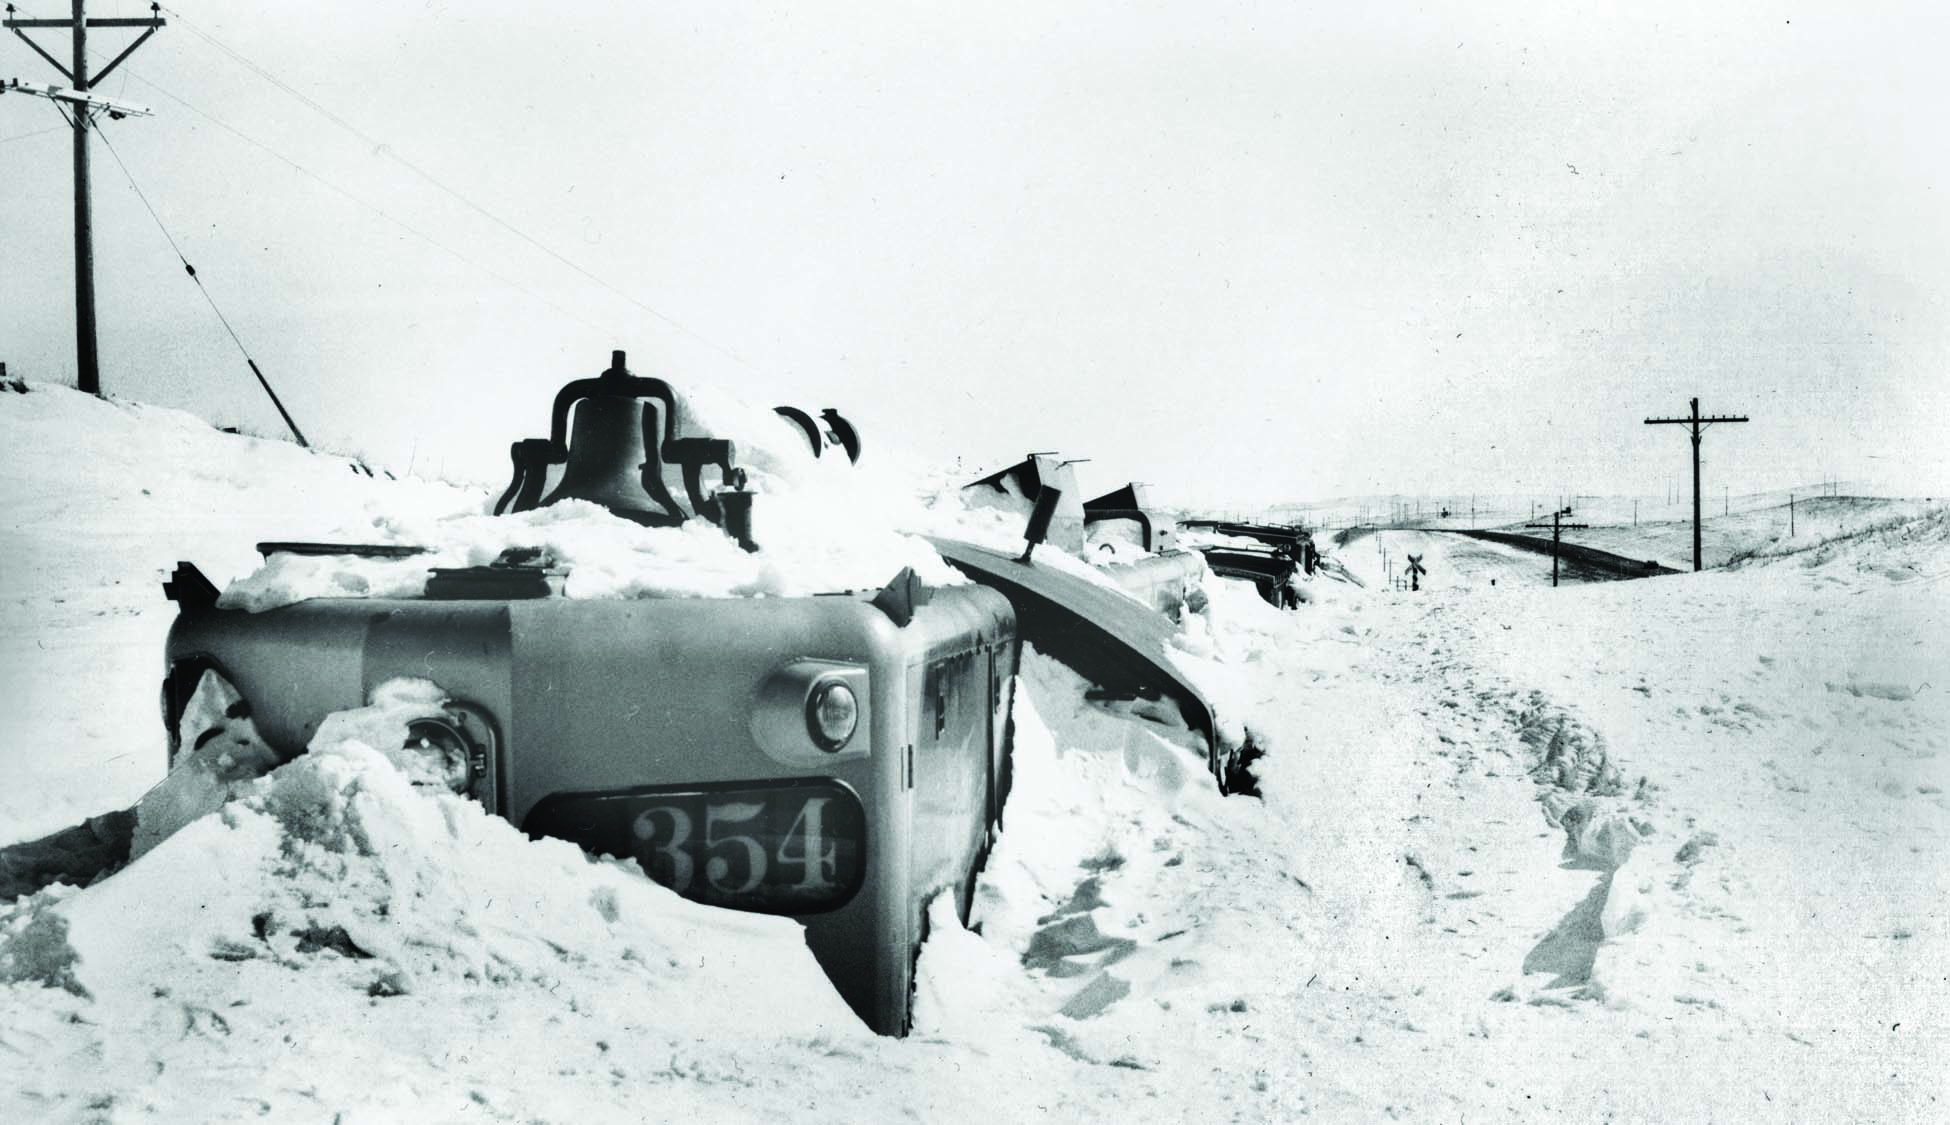 Blizzard of 1966